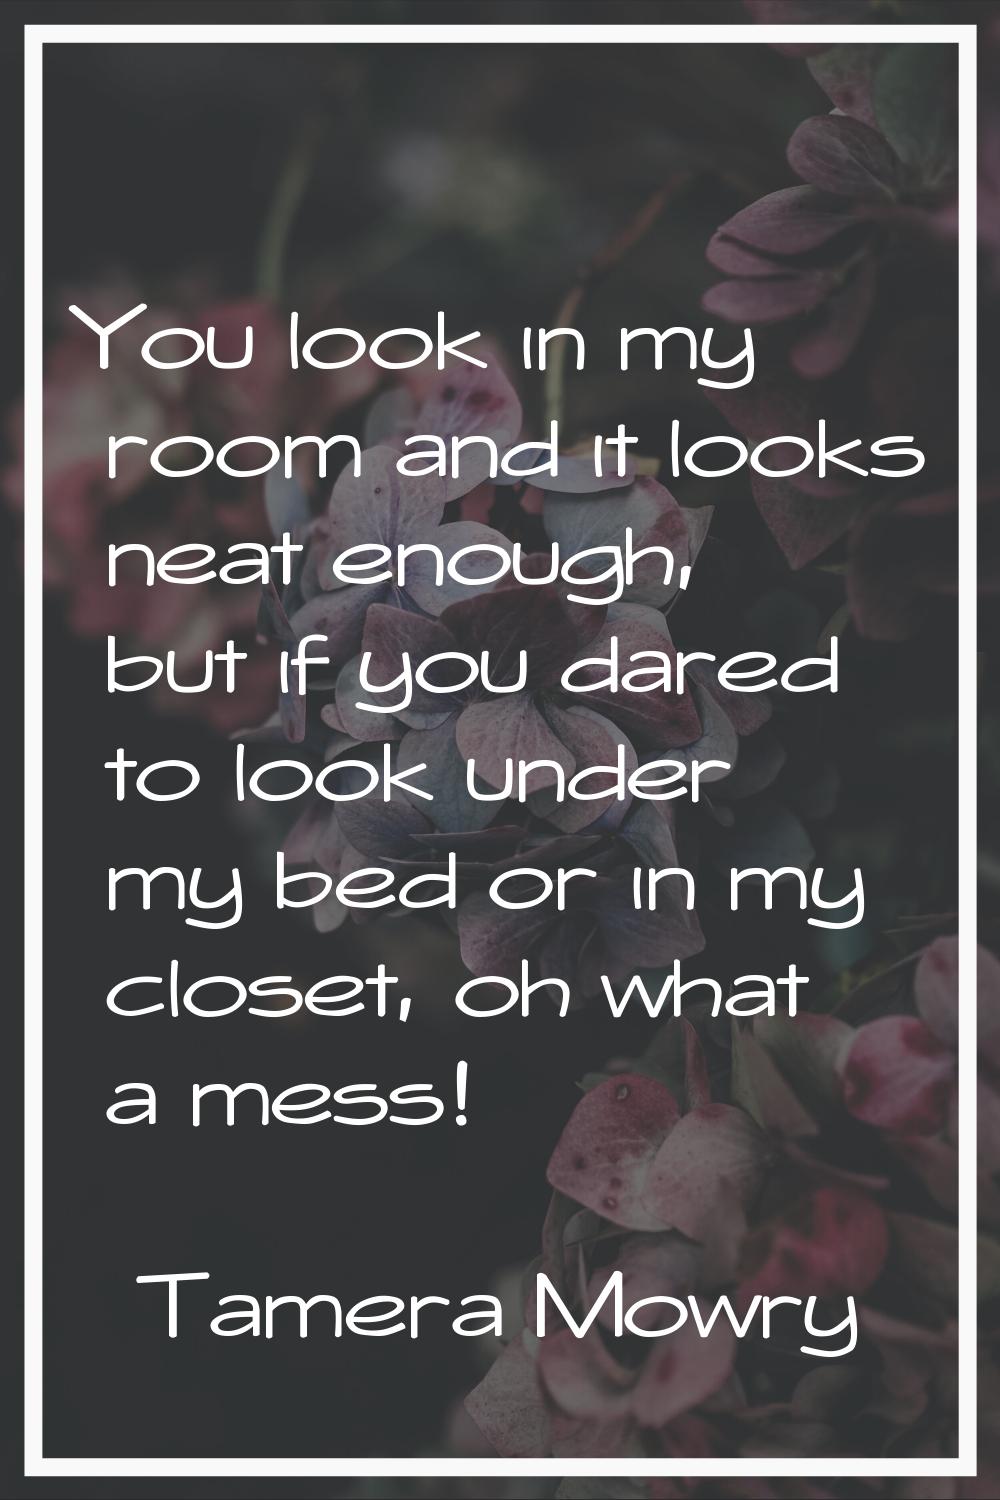 You look in my room and it looks neat enough, but if you dared to look under my bed or in my closet